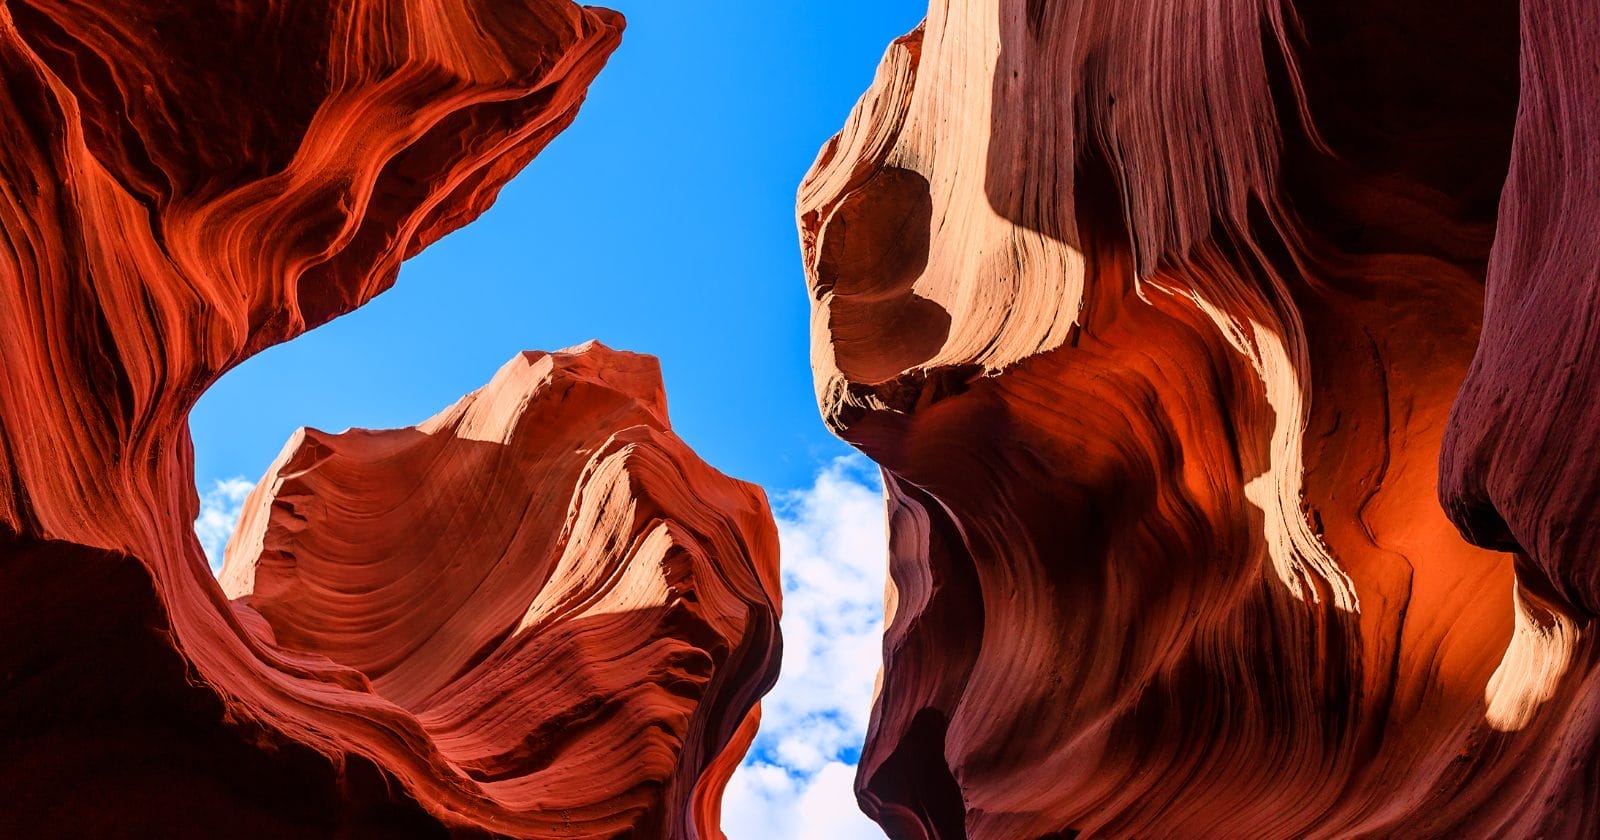 Is Antelope Canyon worth it? Make The Most Out Of Your Trip!